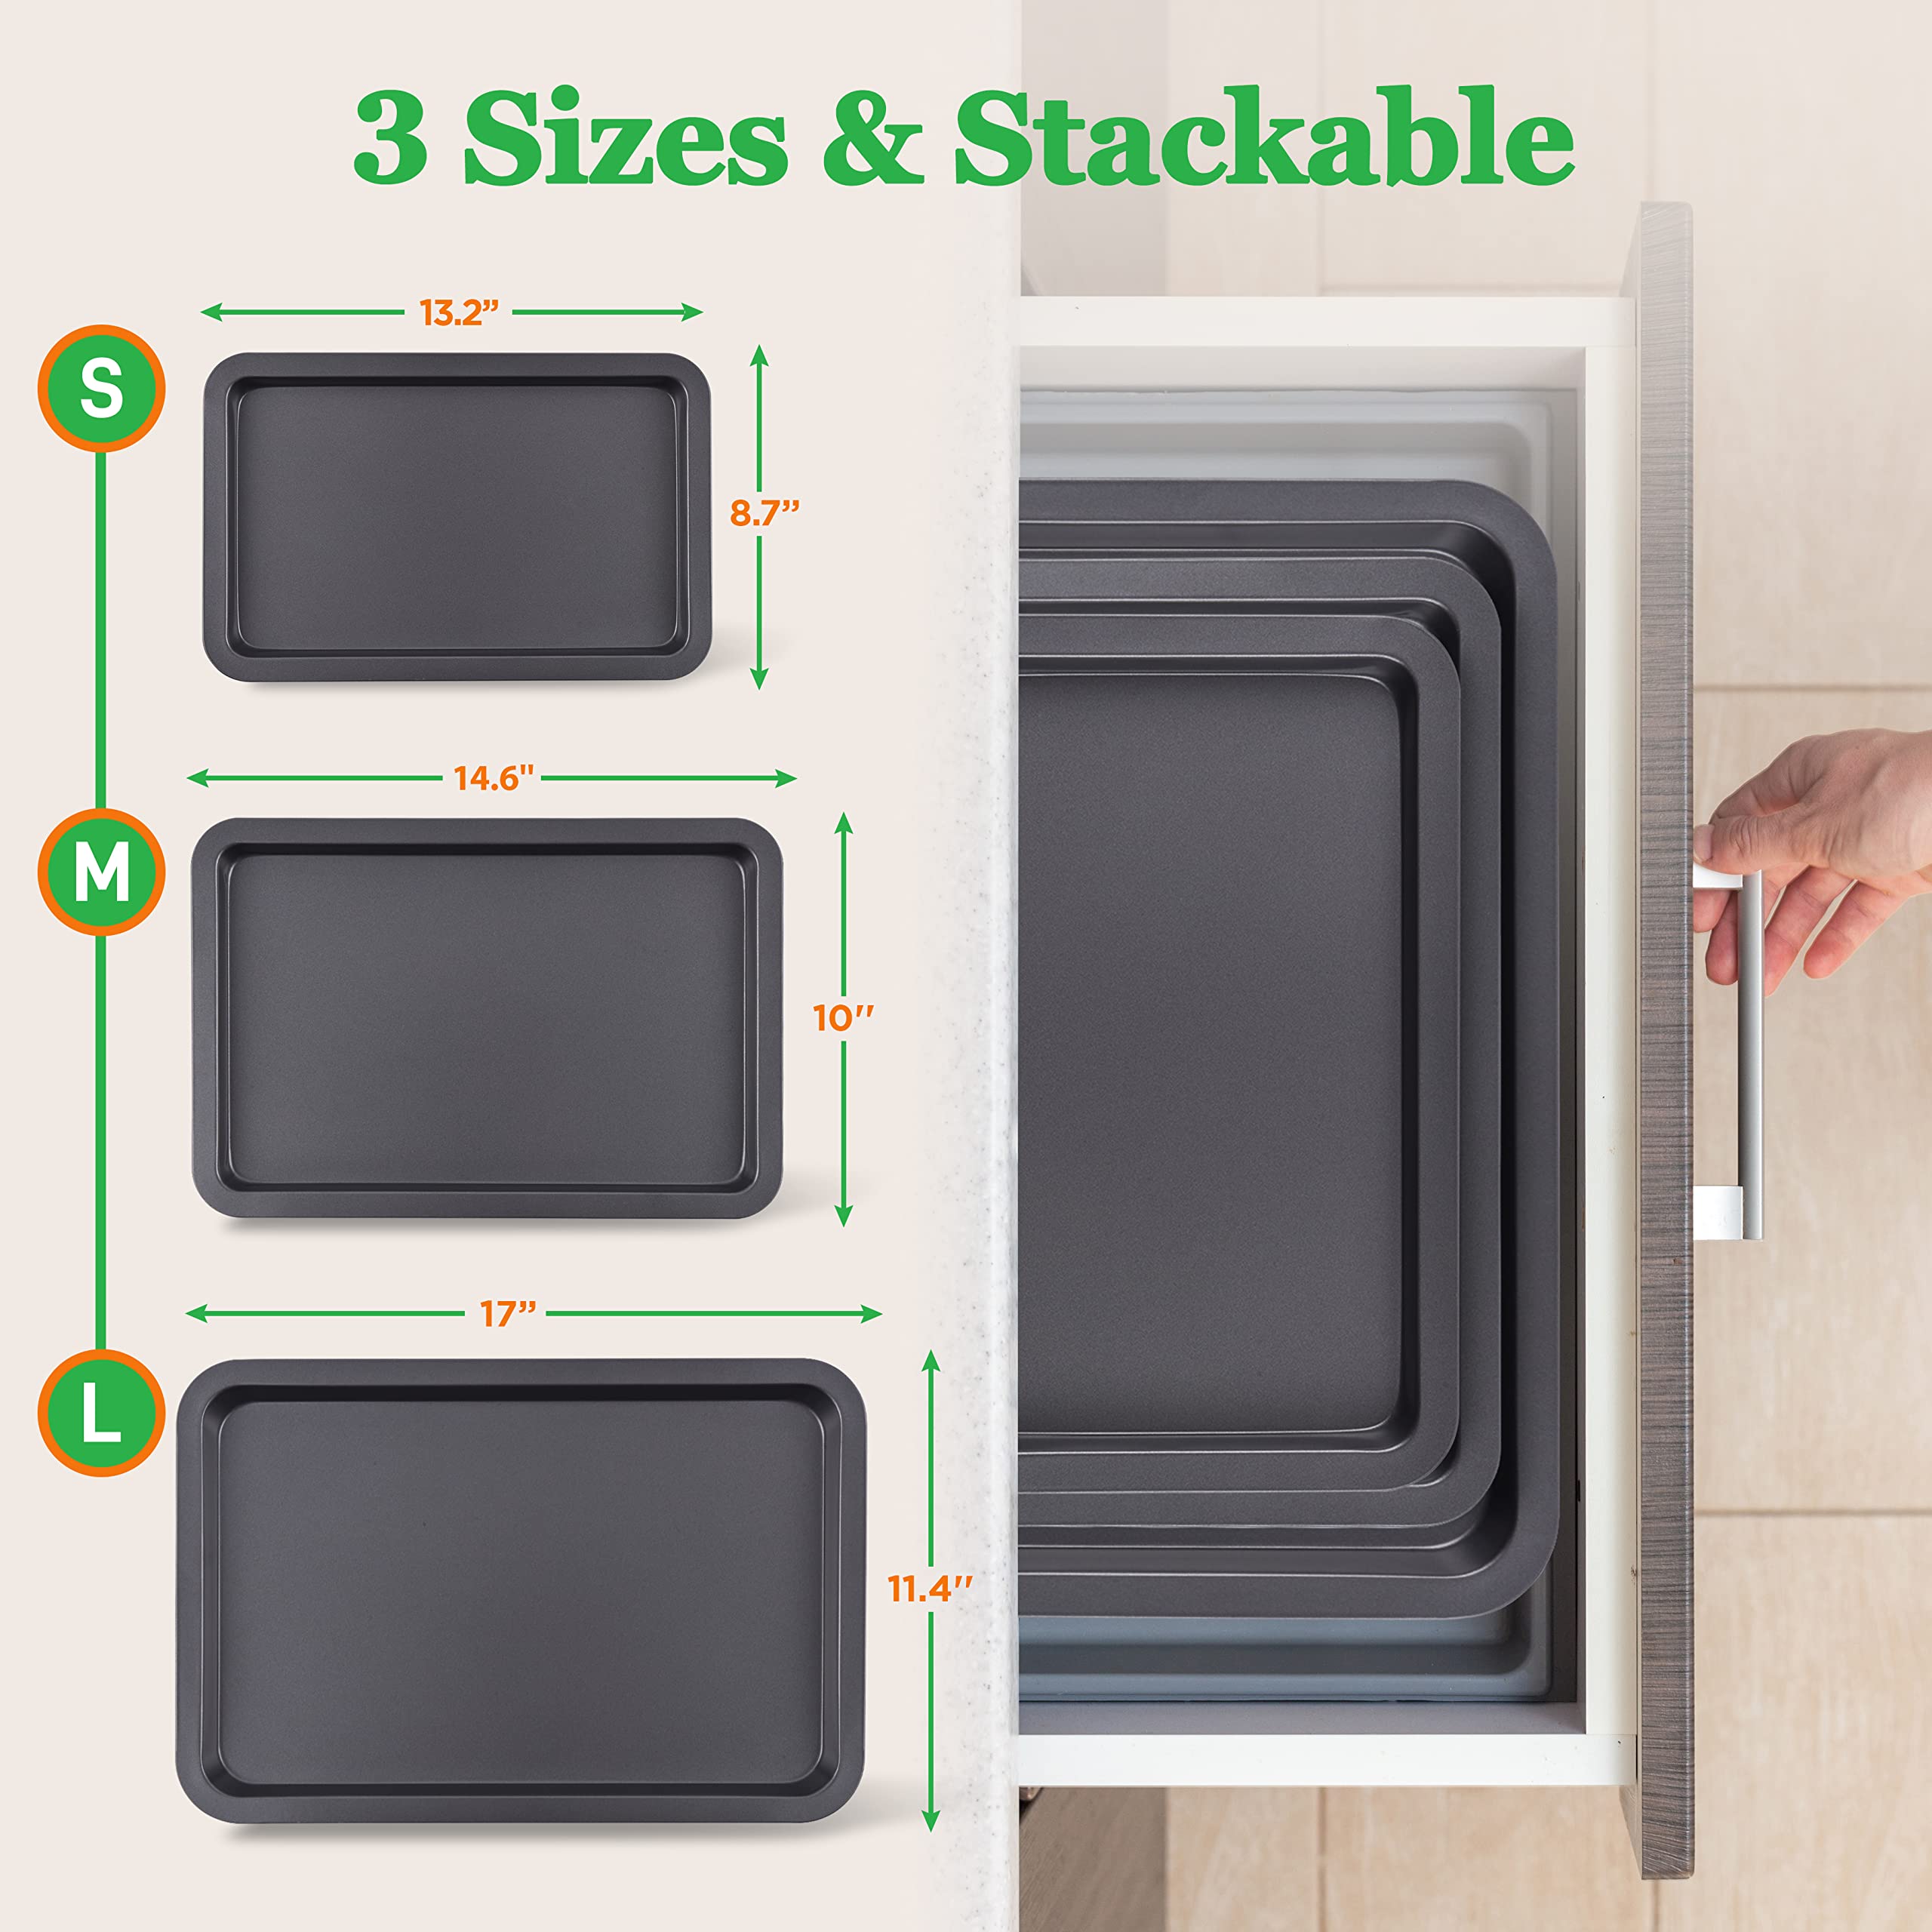 NutriChef 3-Pc. Nonstick Cookie Sheet Pans - PFOAm PFOSm PTFE-Free, Professional Quality Kitchen Cooking Non-Stick Baking Trays w/ Black Coating Inside & Outside